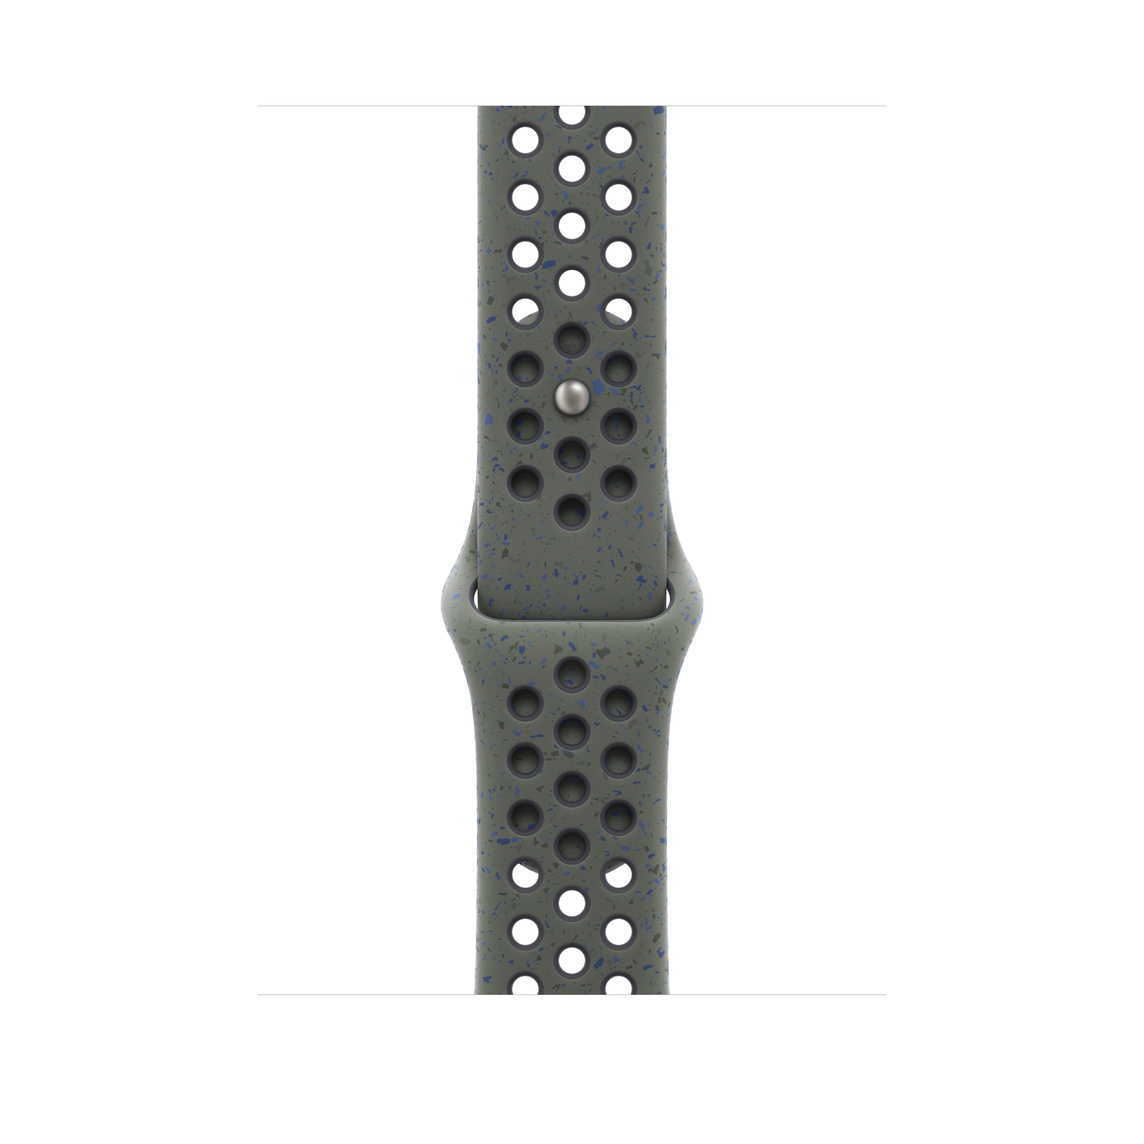 Cargo Khaki (dark green) Nike Sport Band, smooth fluoroelastomer with perforations for breathability and pin-and-tuck closure